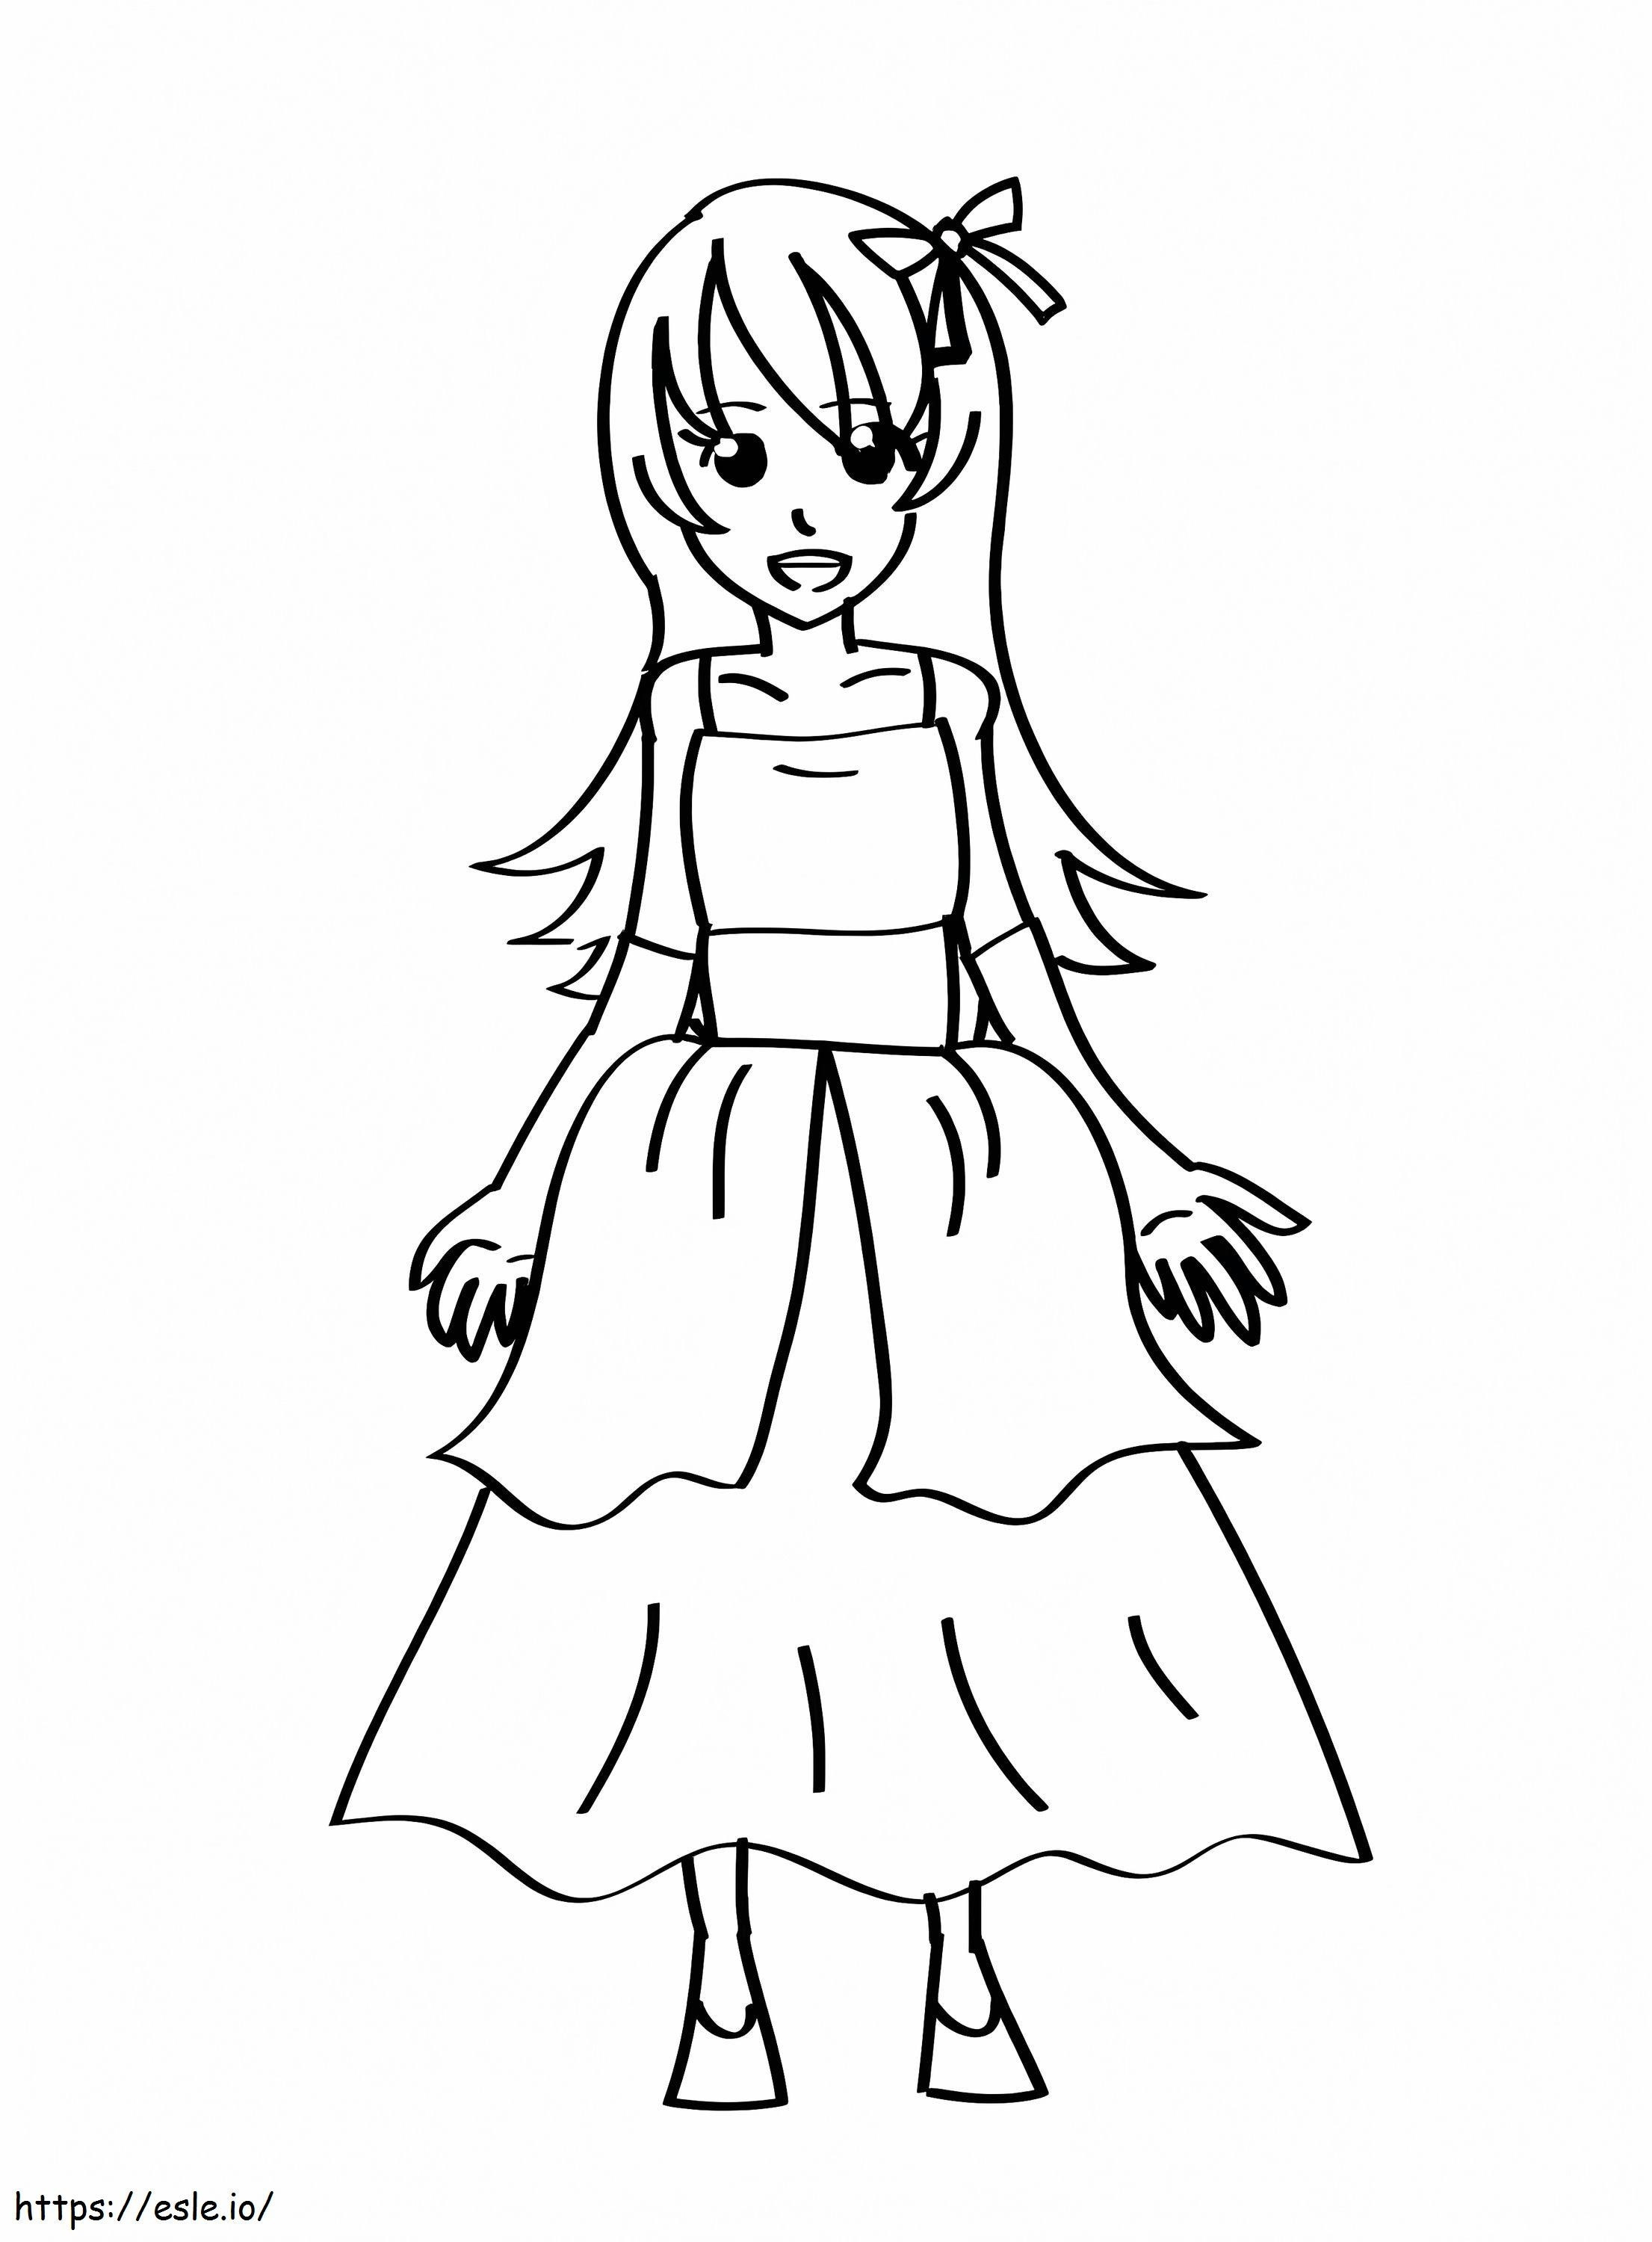 Girl In Dress coloring page